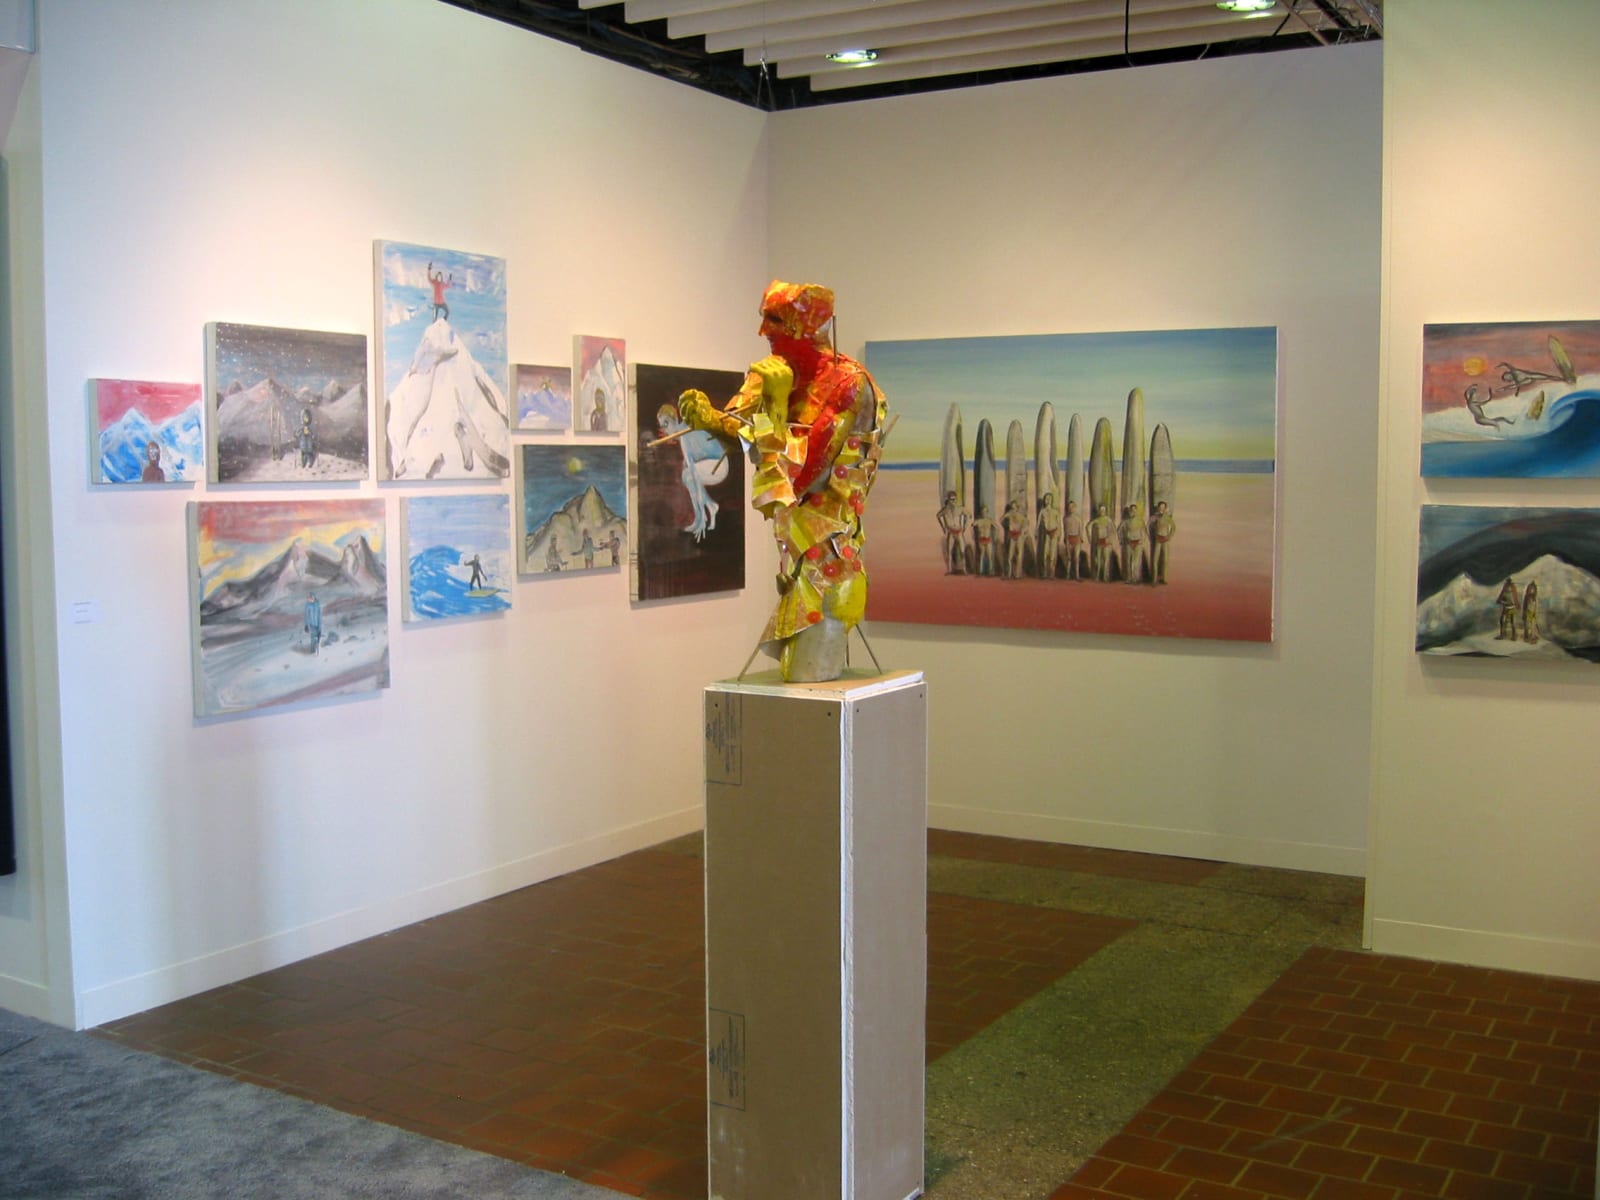 The Armory Show 2006